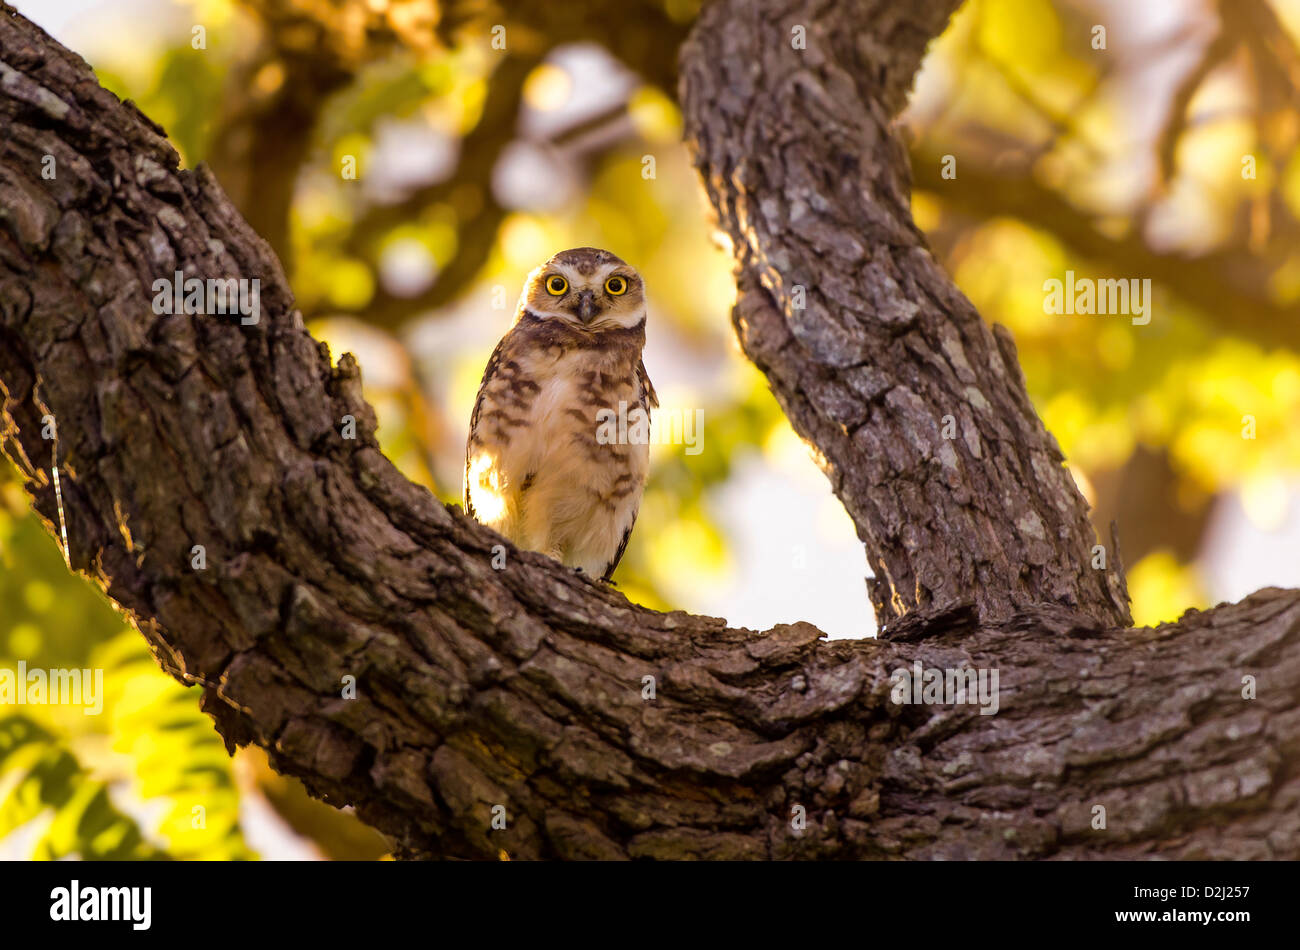 Owl on top of a tree branch looking at the photographer. Stock Photo